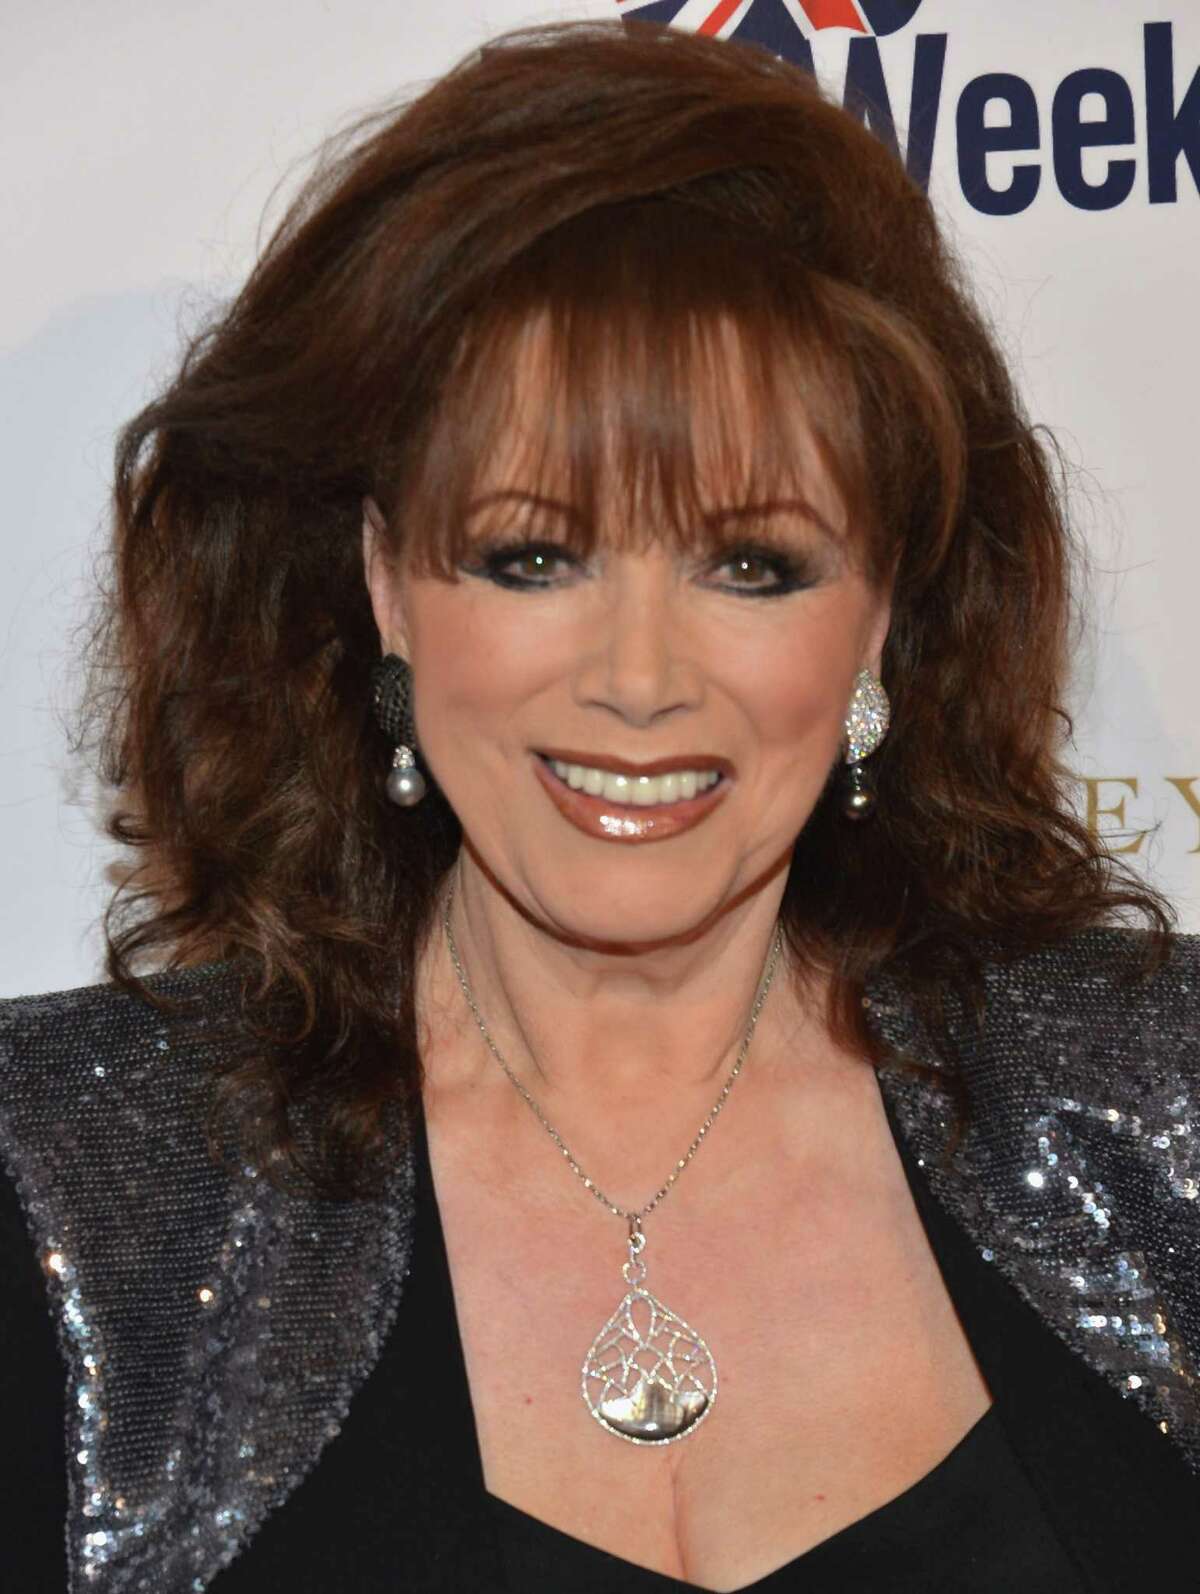 FILE - SEPTEMBER 19: Novelist Jackie Collins has passed away after a battle with breast cancer. She was 77 years old. BEVERLY HILLS, CA - MAY 04: Author Jackie Collins arrives to BritWeek 2012's "Evening with Piers Morgan" on May 4, 2012 in Beverly Hills, California. (Photo by Alberto E. Rodriguez/Getty Images)